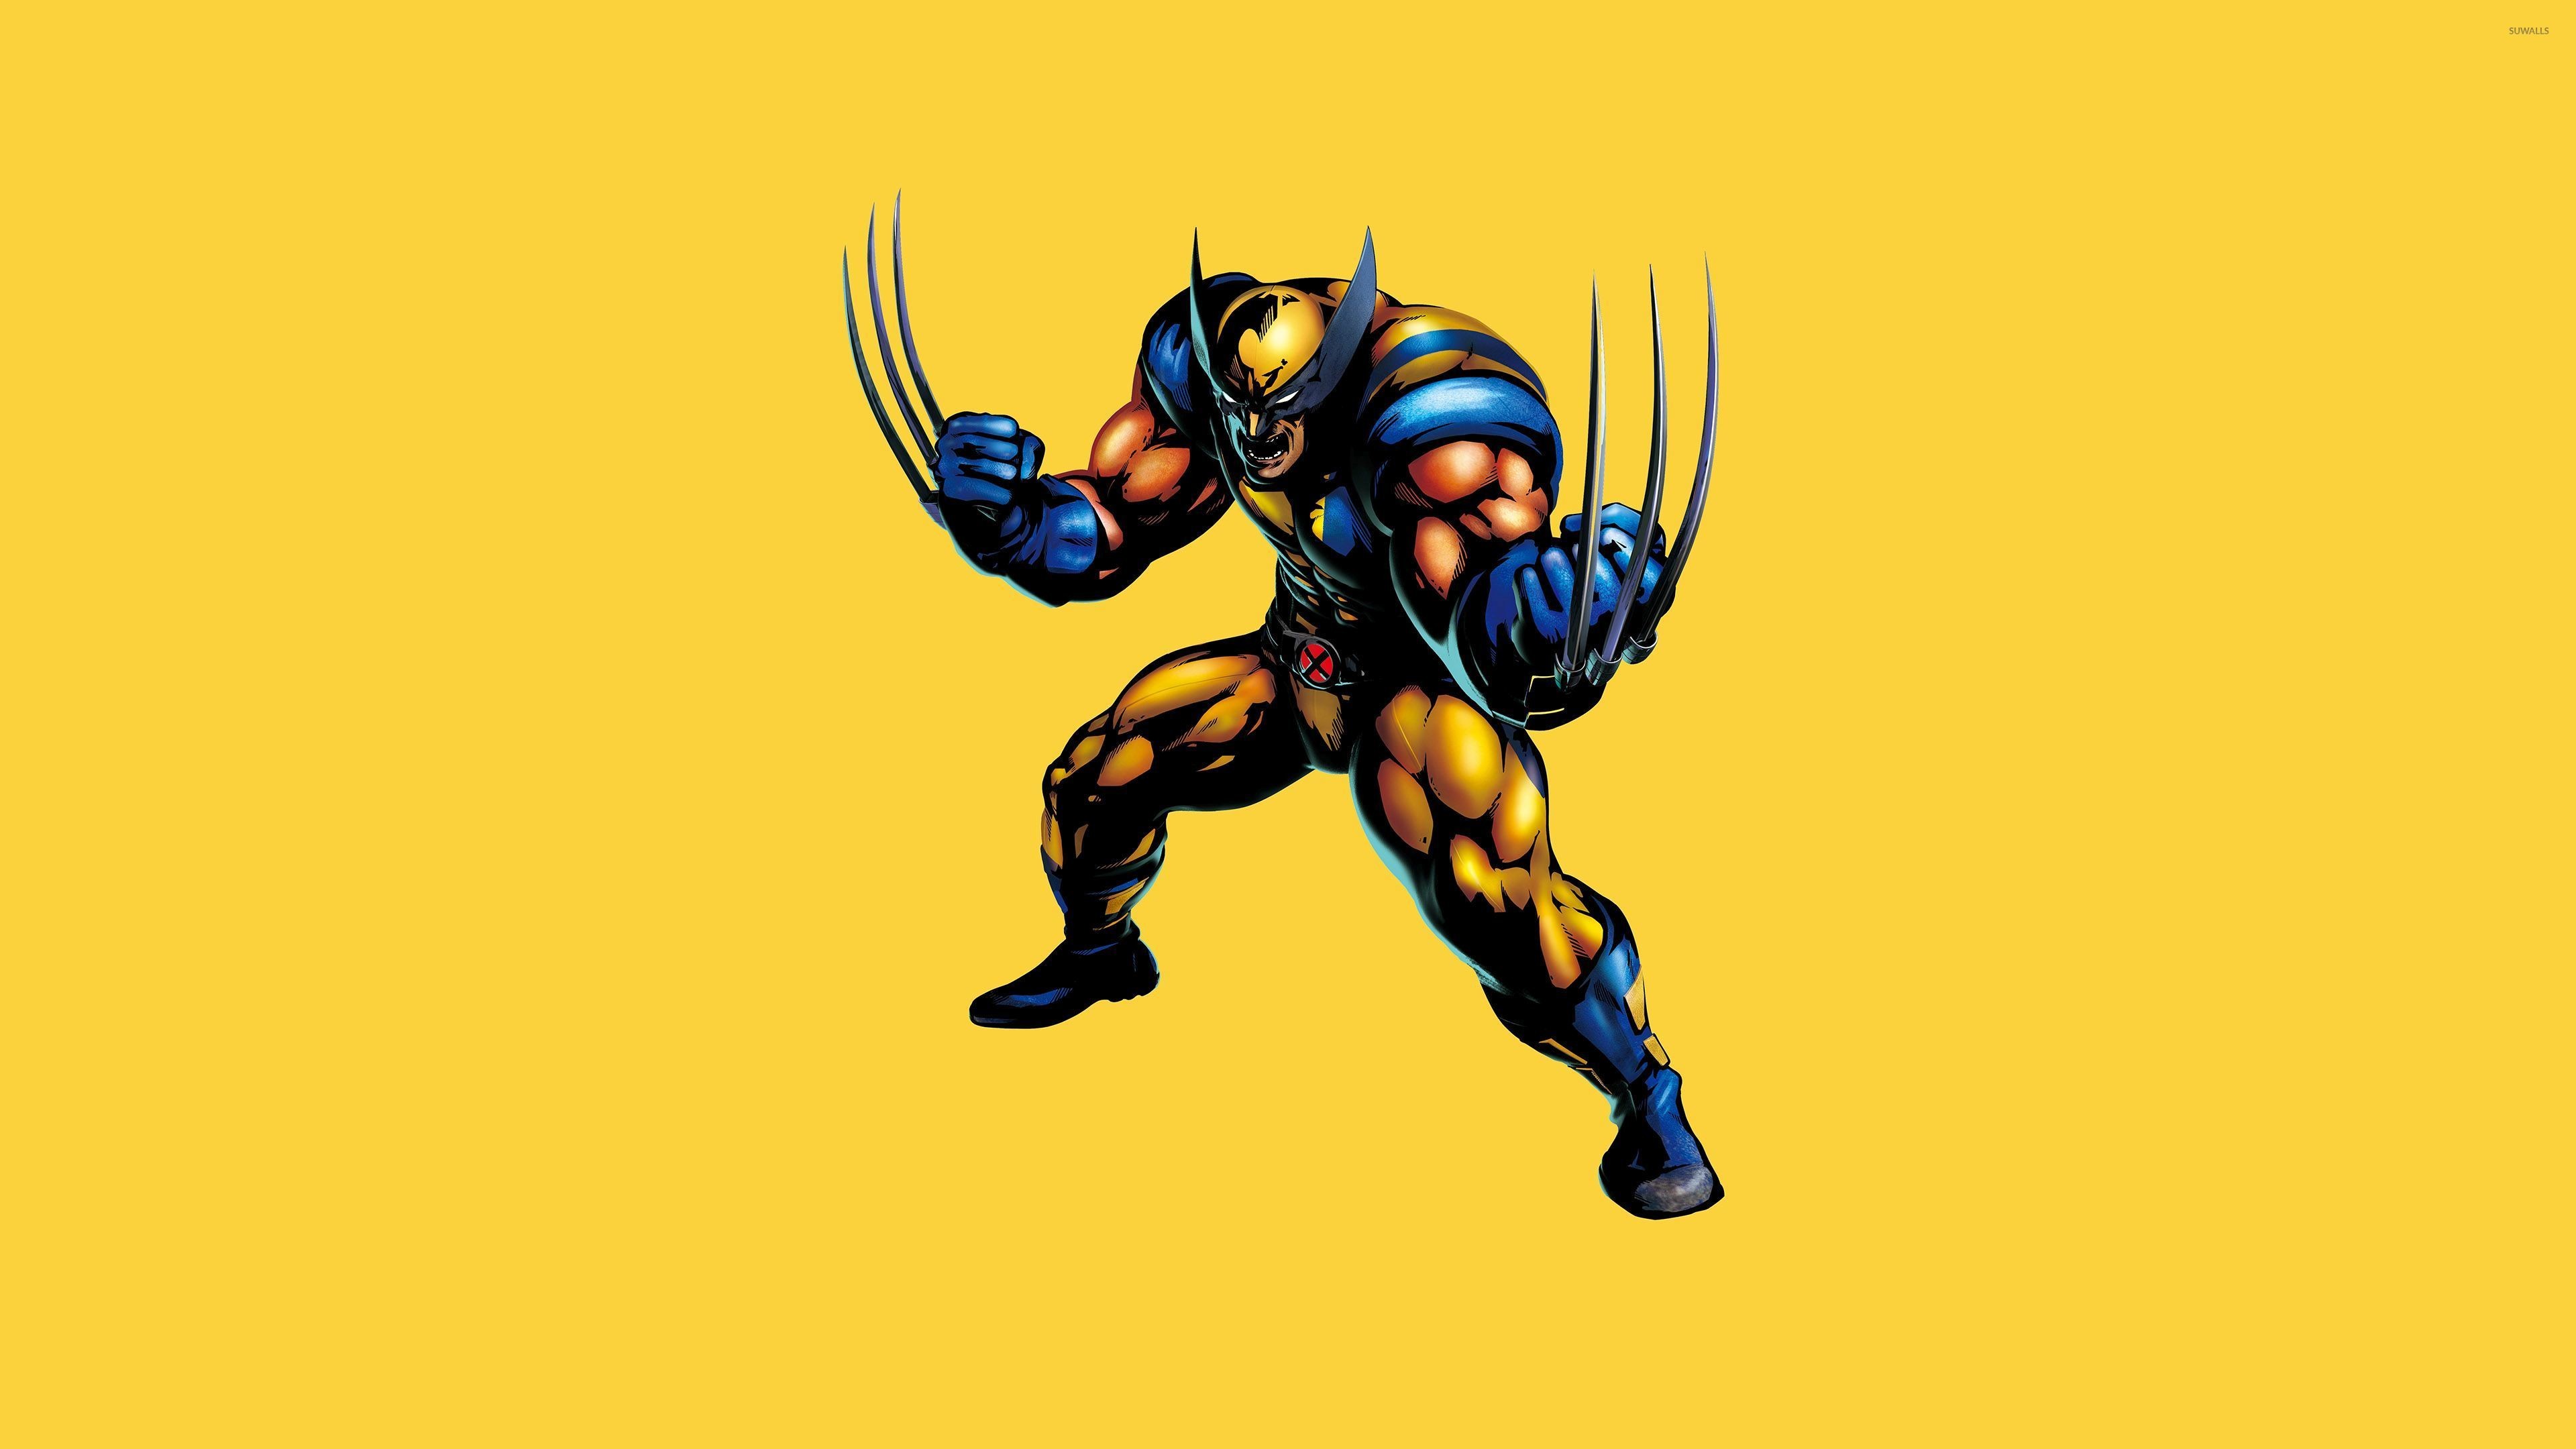 3840x2160 Wolverine ready for a fight wallpaper